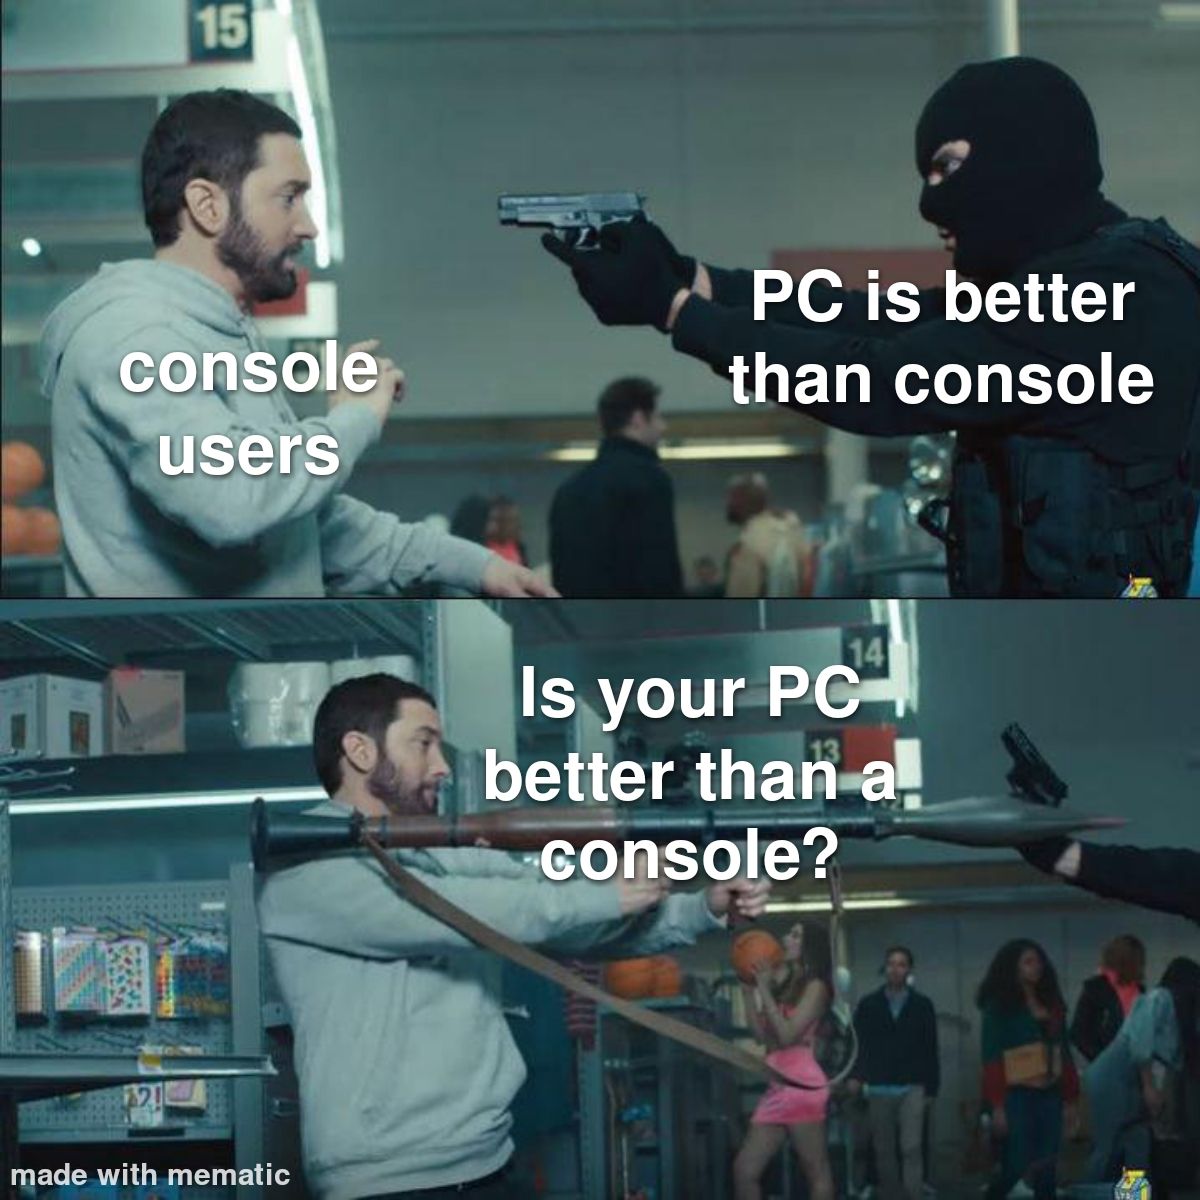 Is your PC really superior?